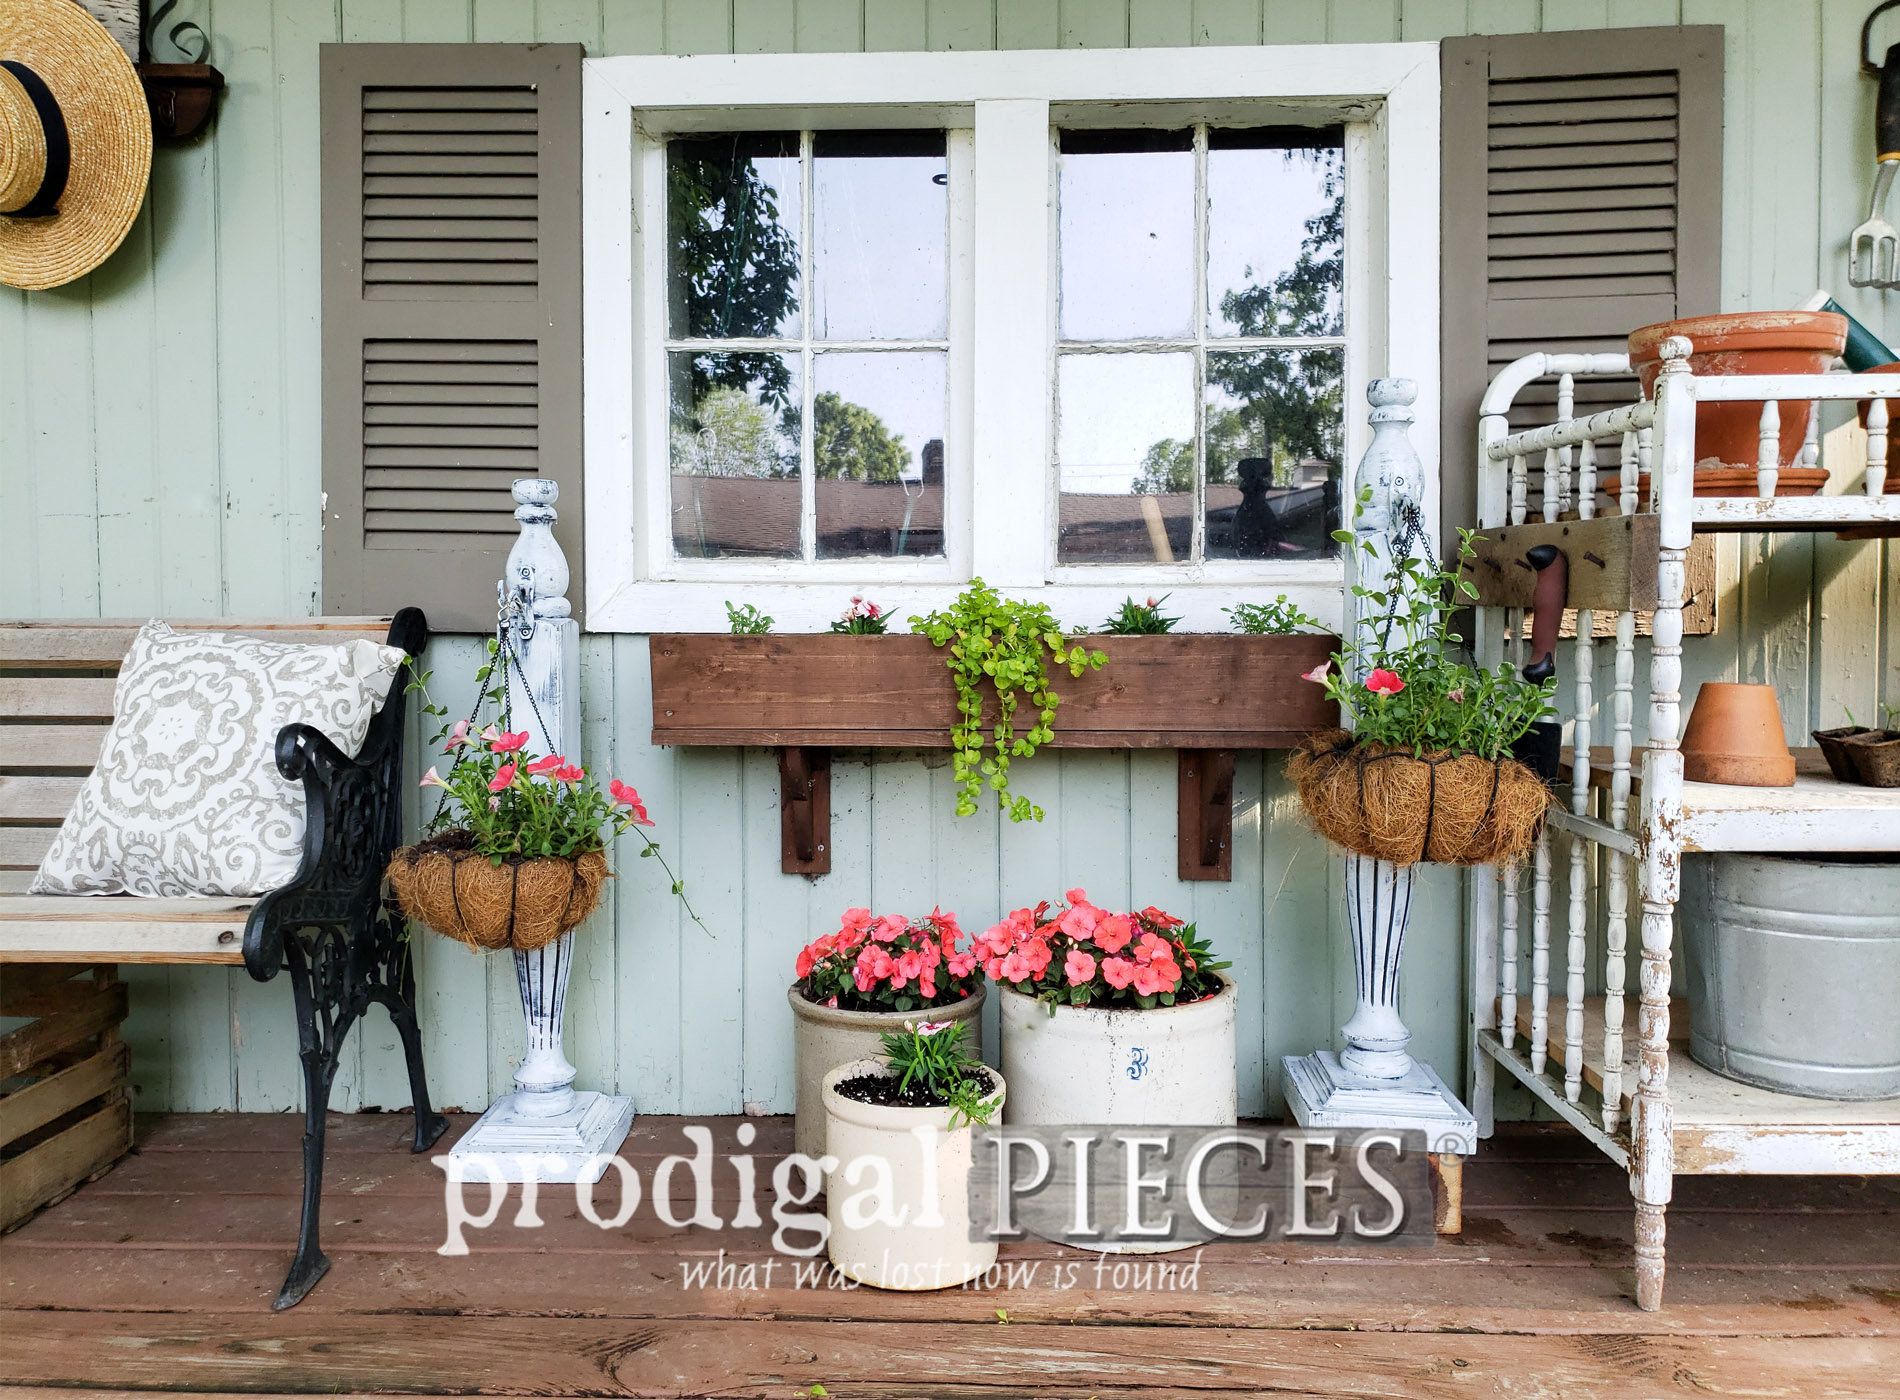 Featured Upcycled Footboard into Home & Garden Decor by Larissa of Prodigal Pieces | prodigalpieces.com #prodigalpieces #diy #home #homedecor #garden